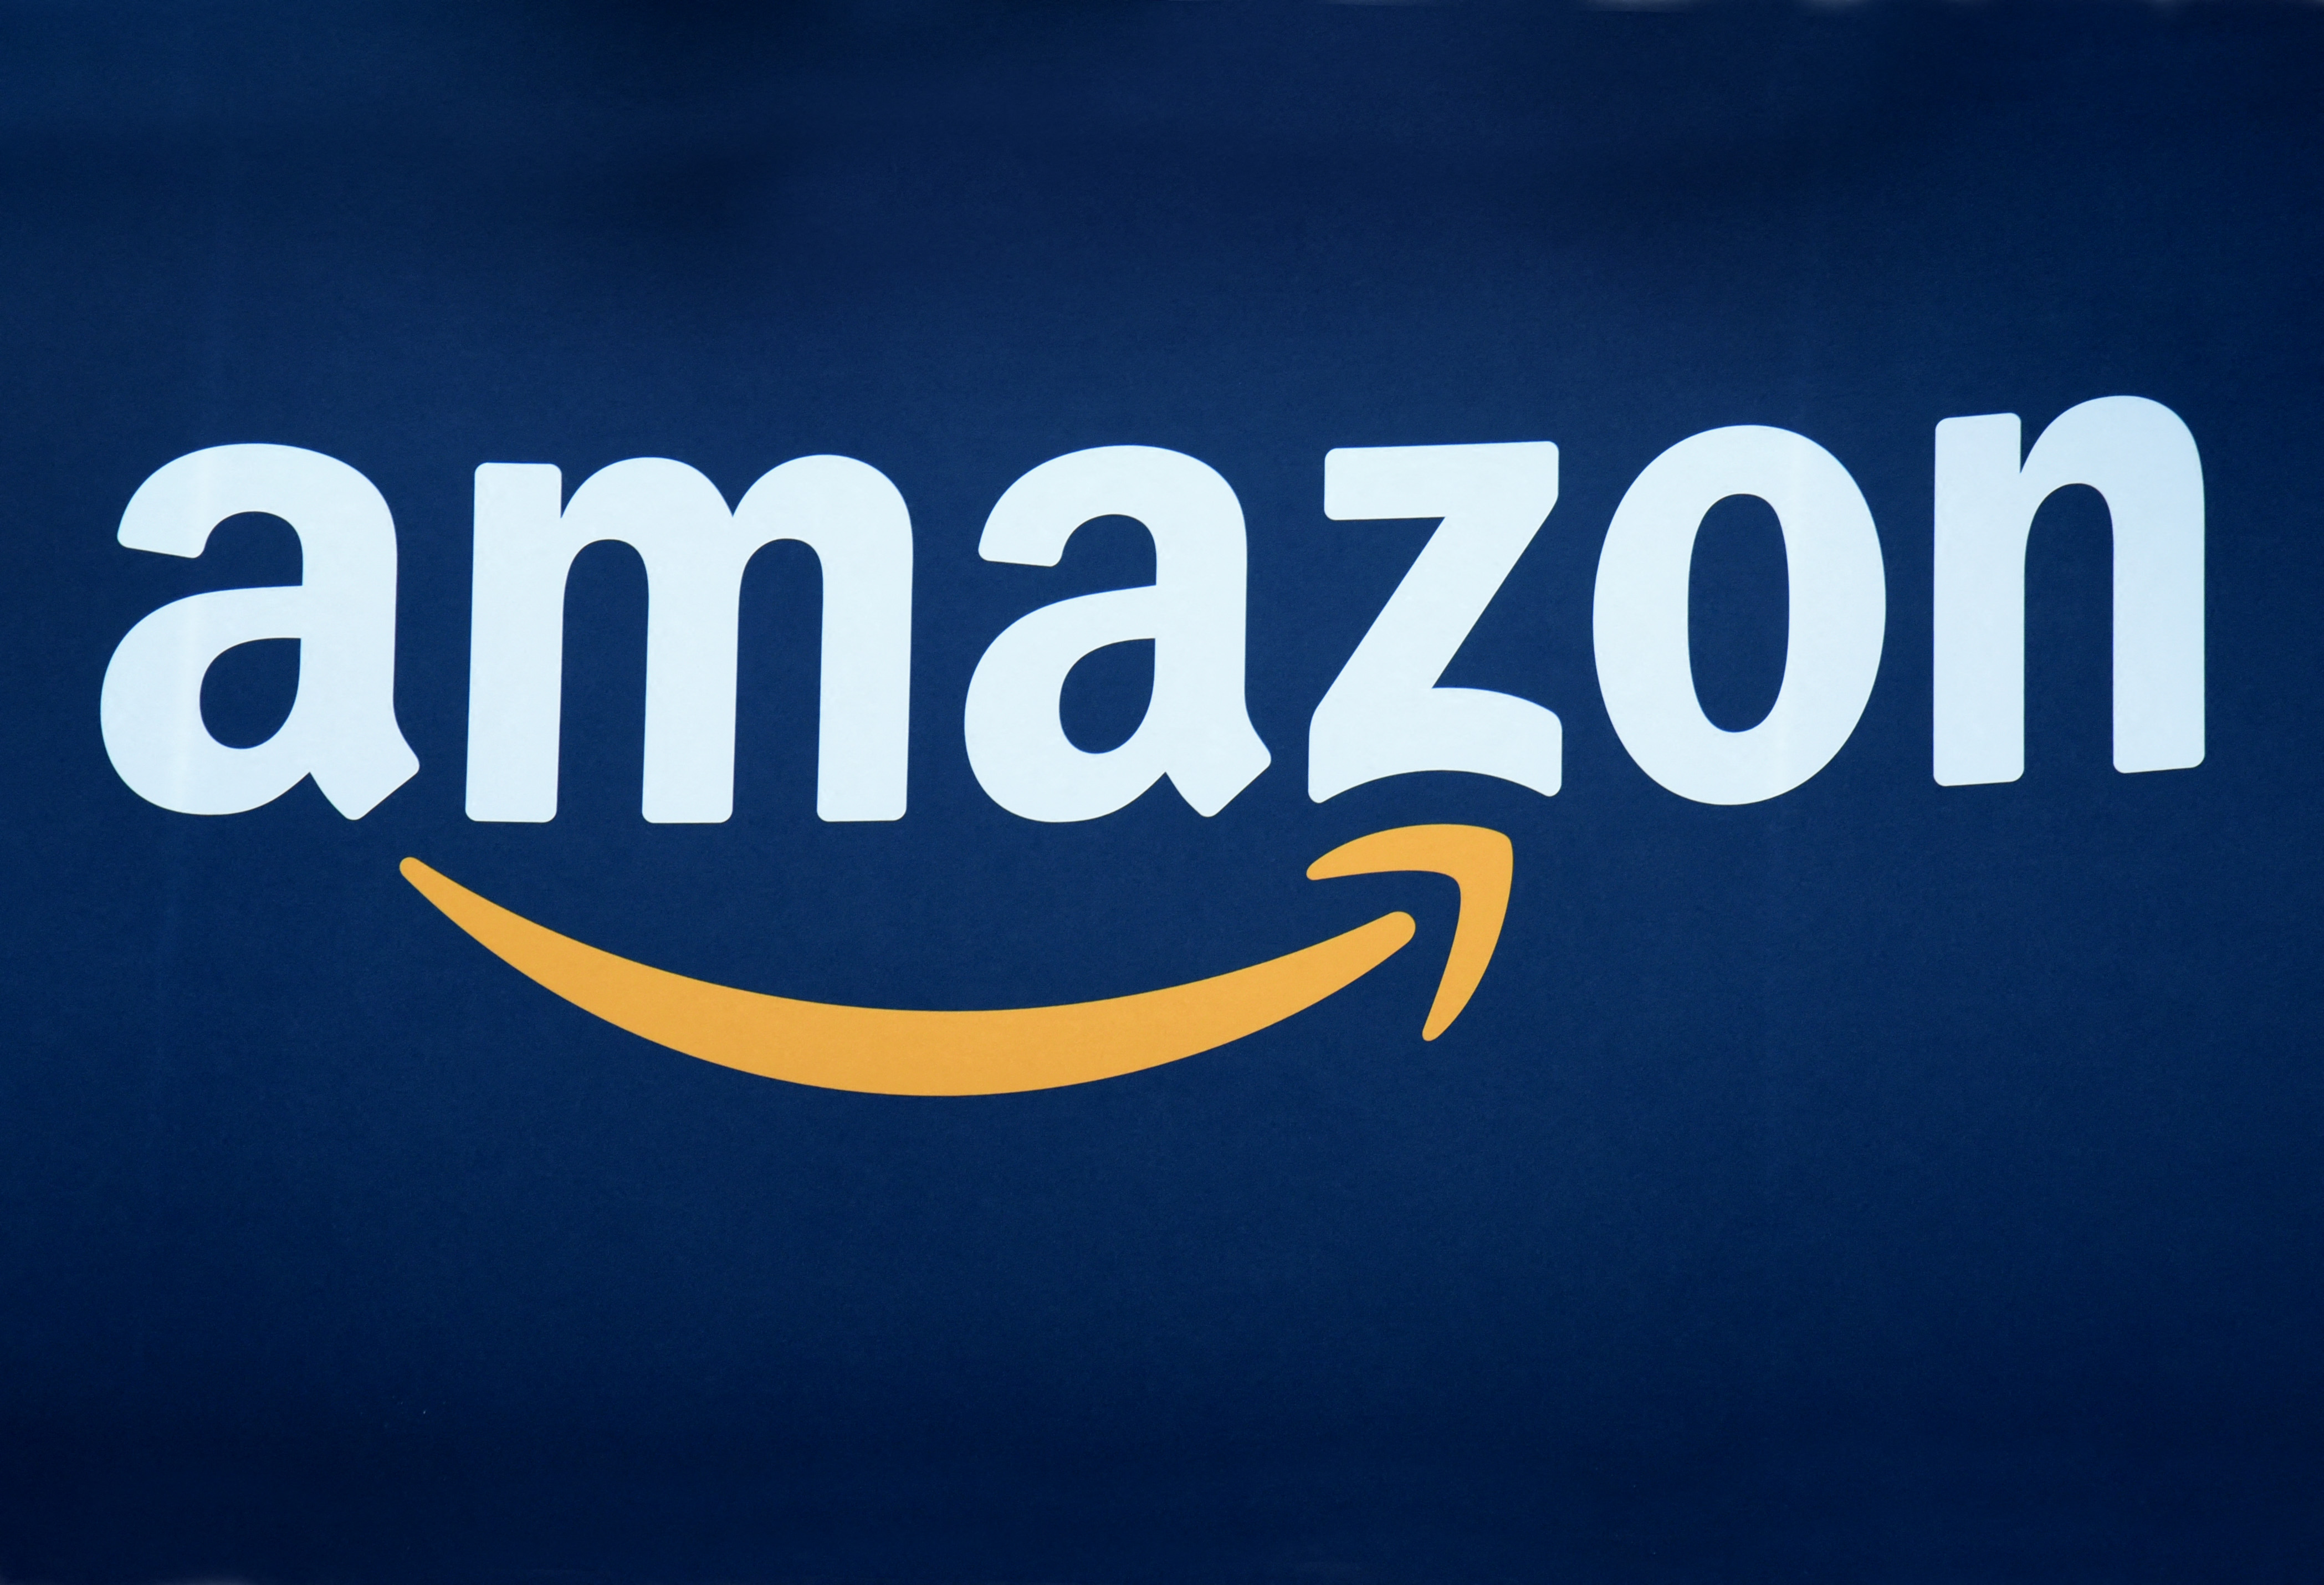 US Senate Committee has launched an investigation into working conditions at Amazon warehouses